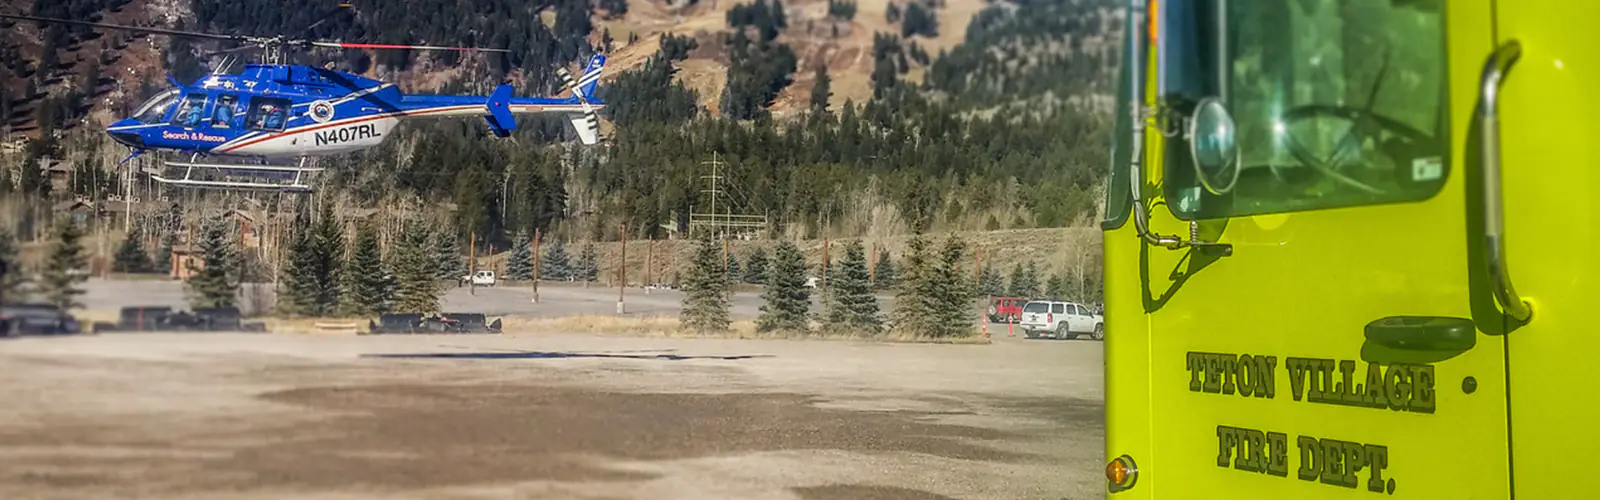 A search and rescue helicopter landing near a fire truck in Teton Village, WY.